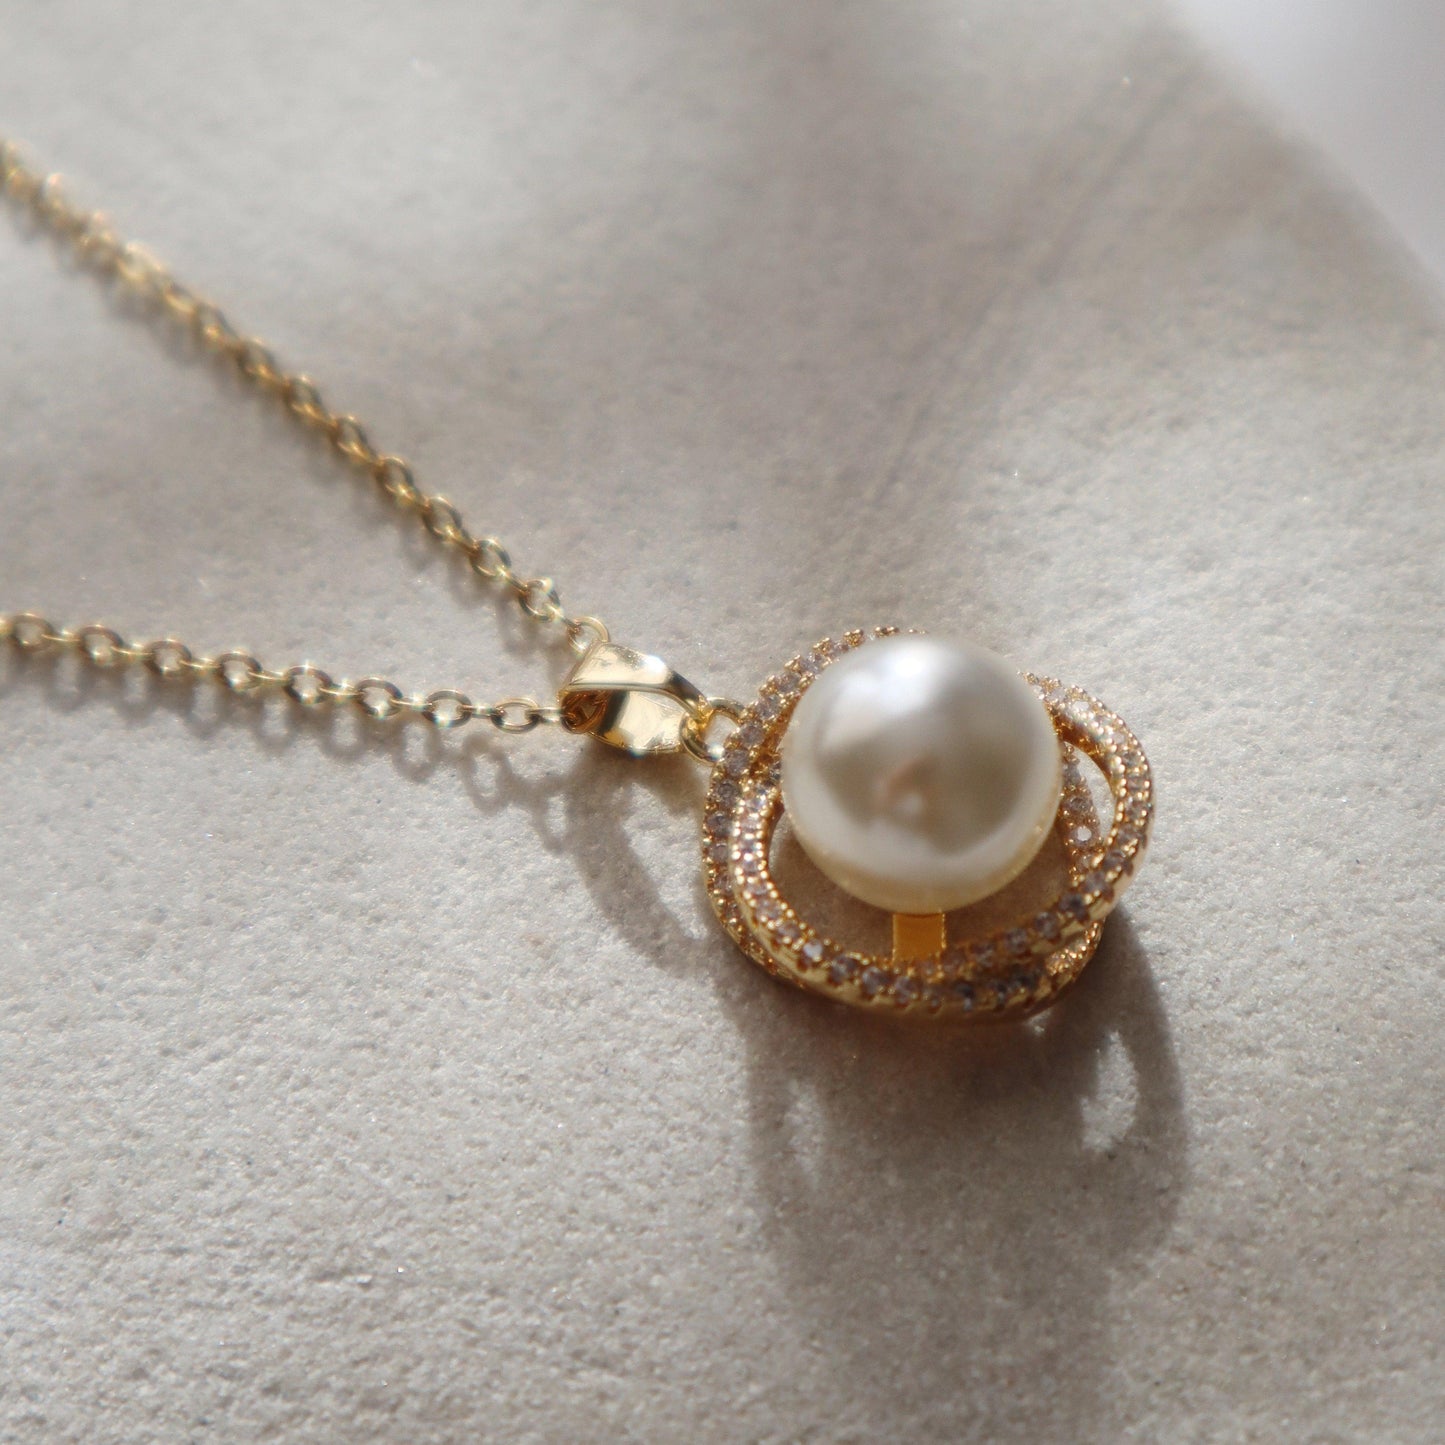 Mae Pearl Necklace - JESSA JEWELRY | GOLD JEWELRY; dainty, affordable gold everyday jewelry. Tarnish free, water-resistant, hypoallergenic. Jewelry for everyday wear